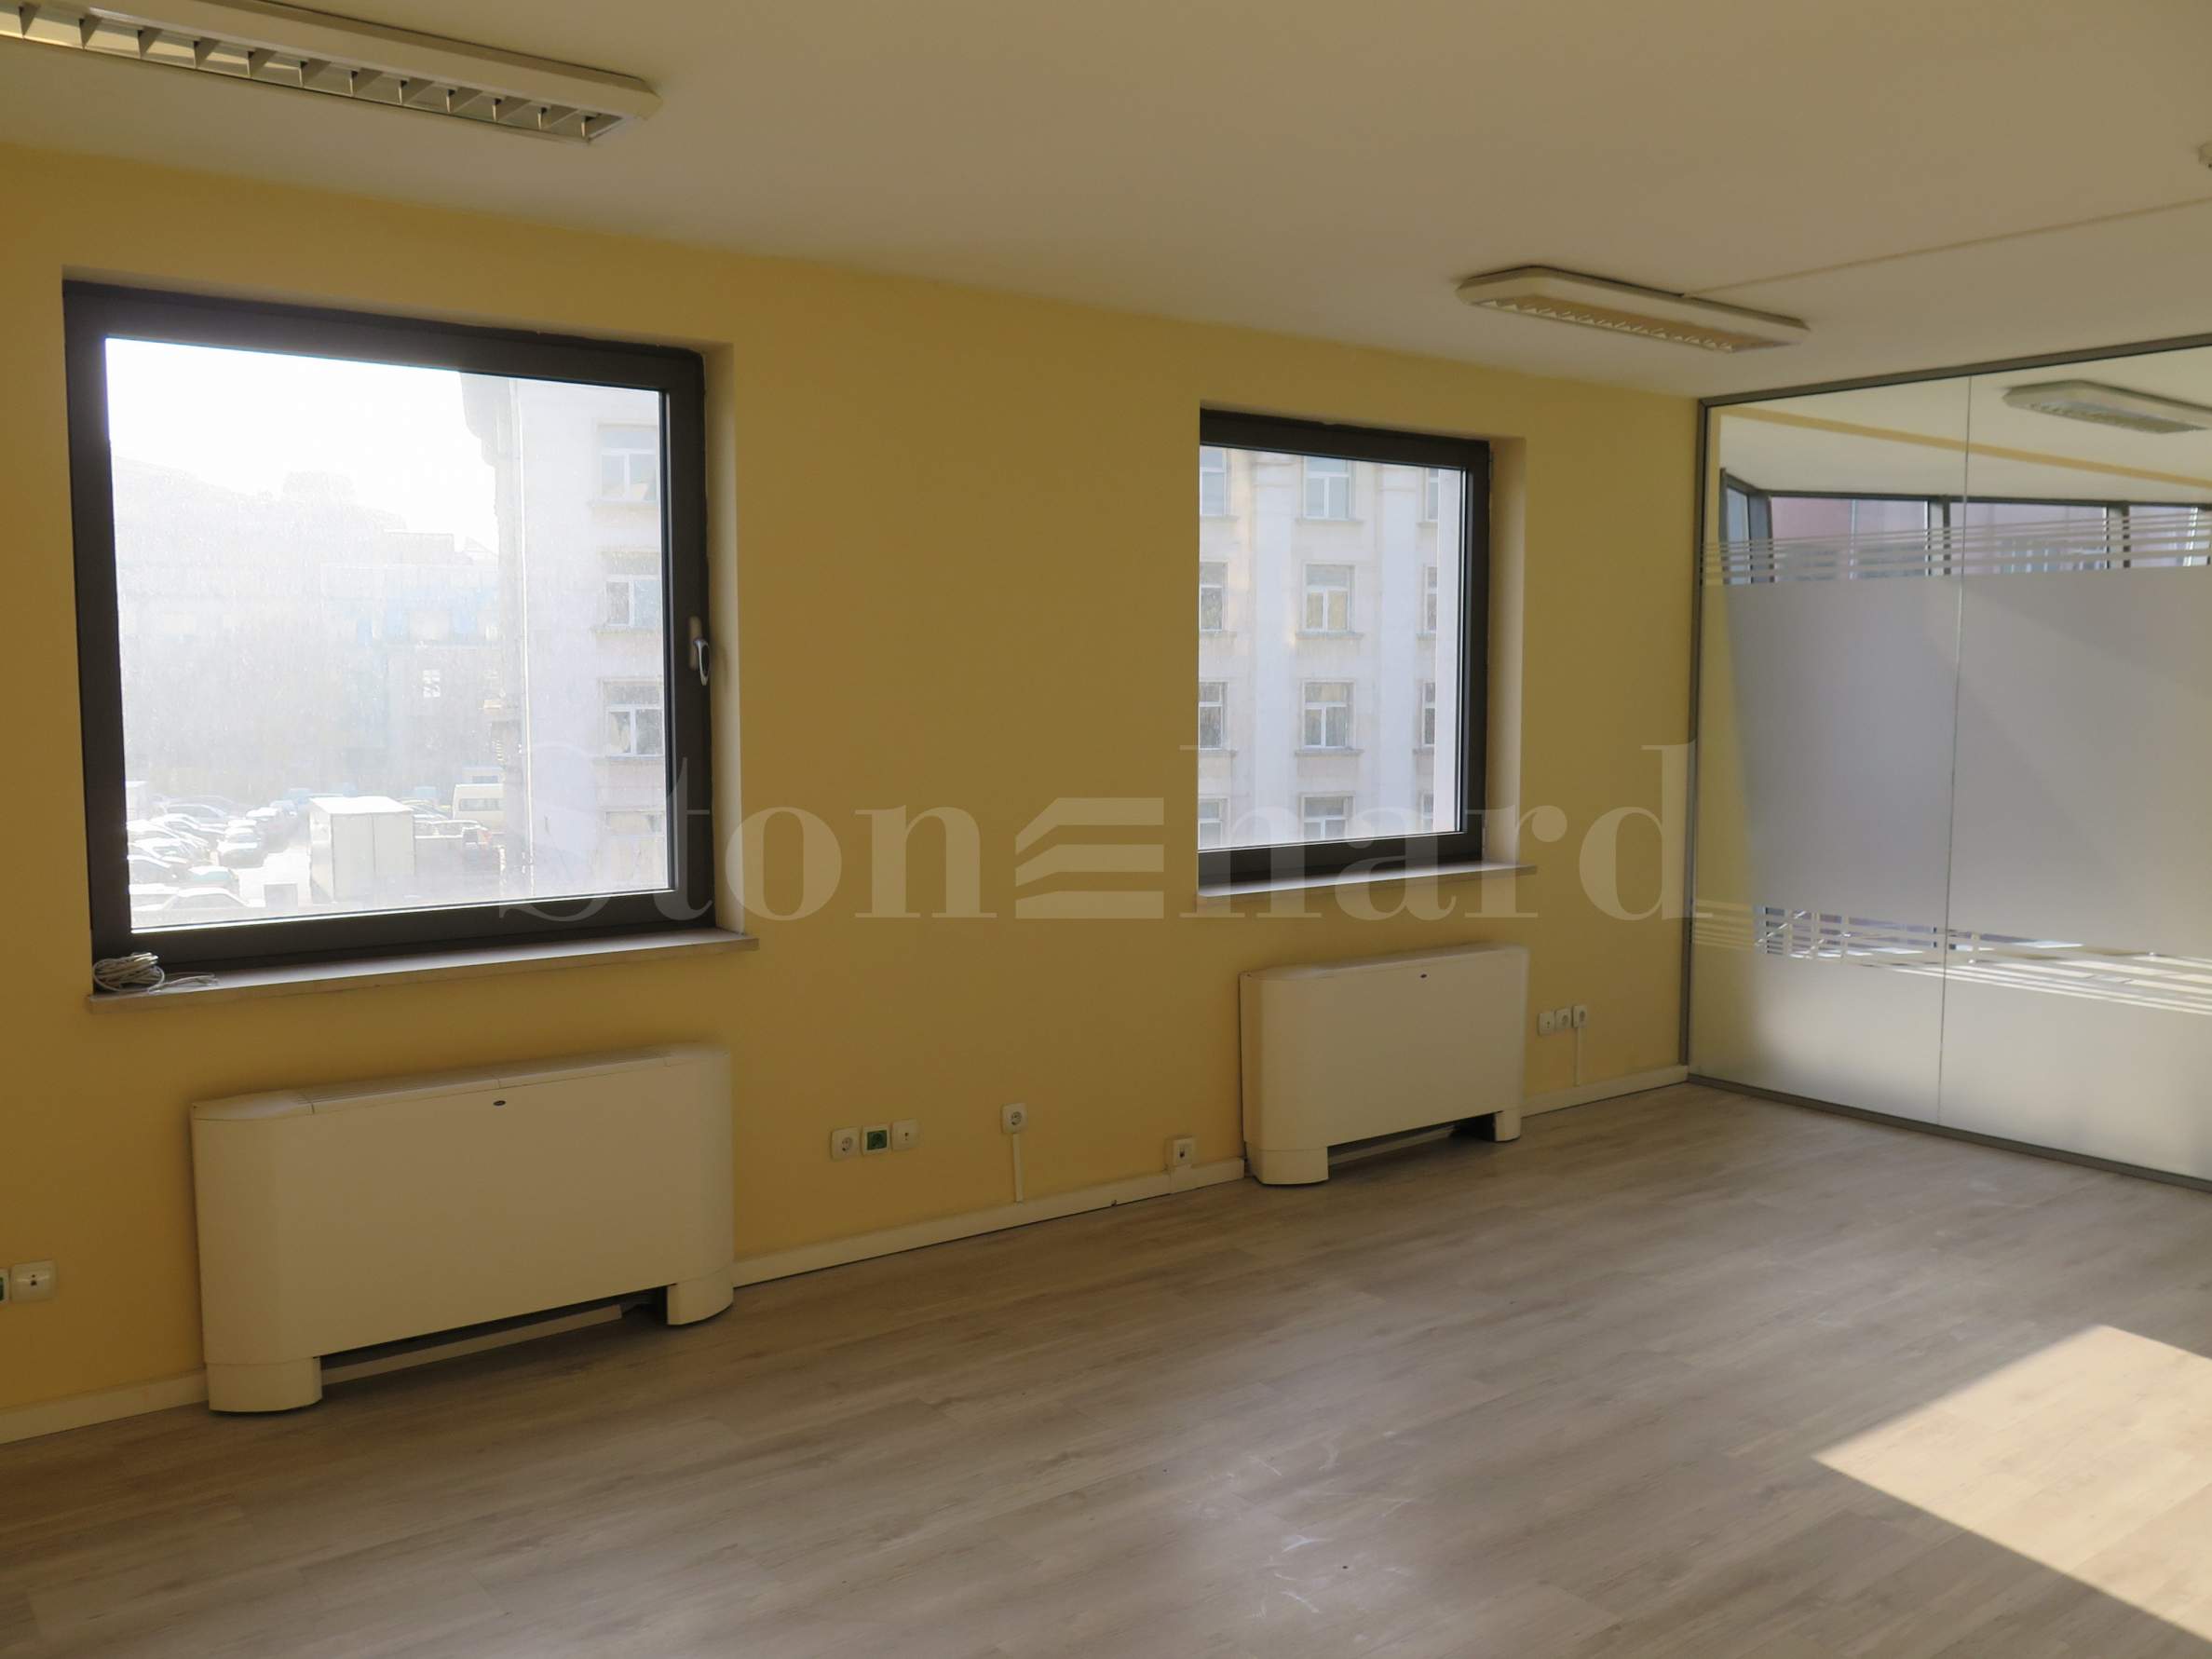 New building with offices in the center of Sofia, opposite the Opera House2 - Stonehard